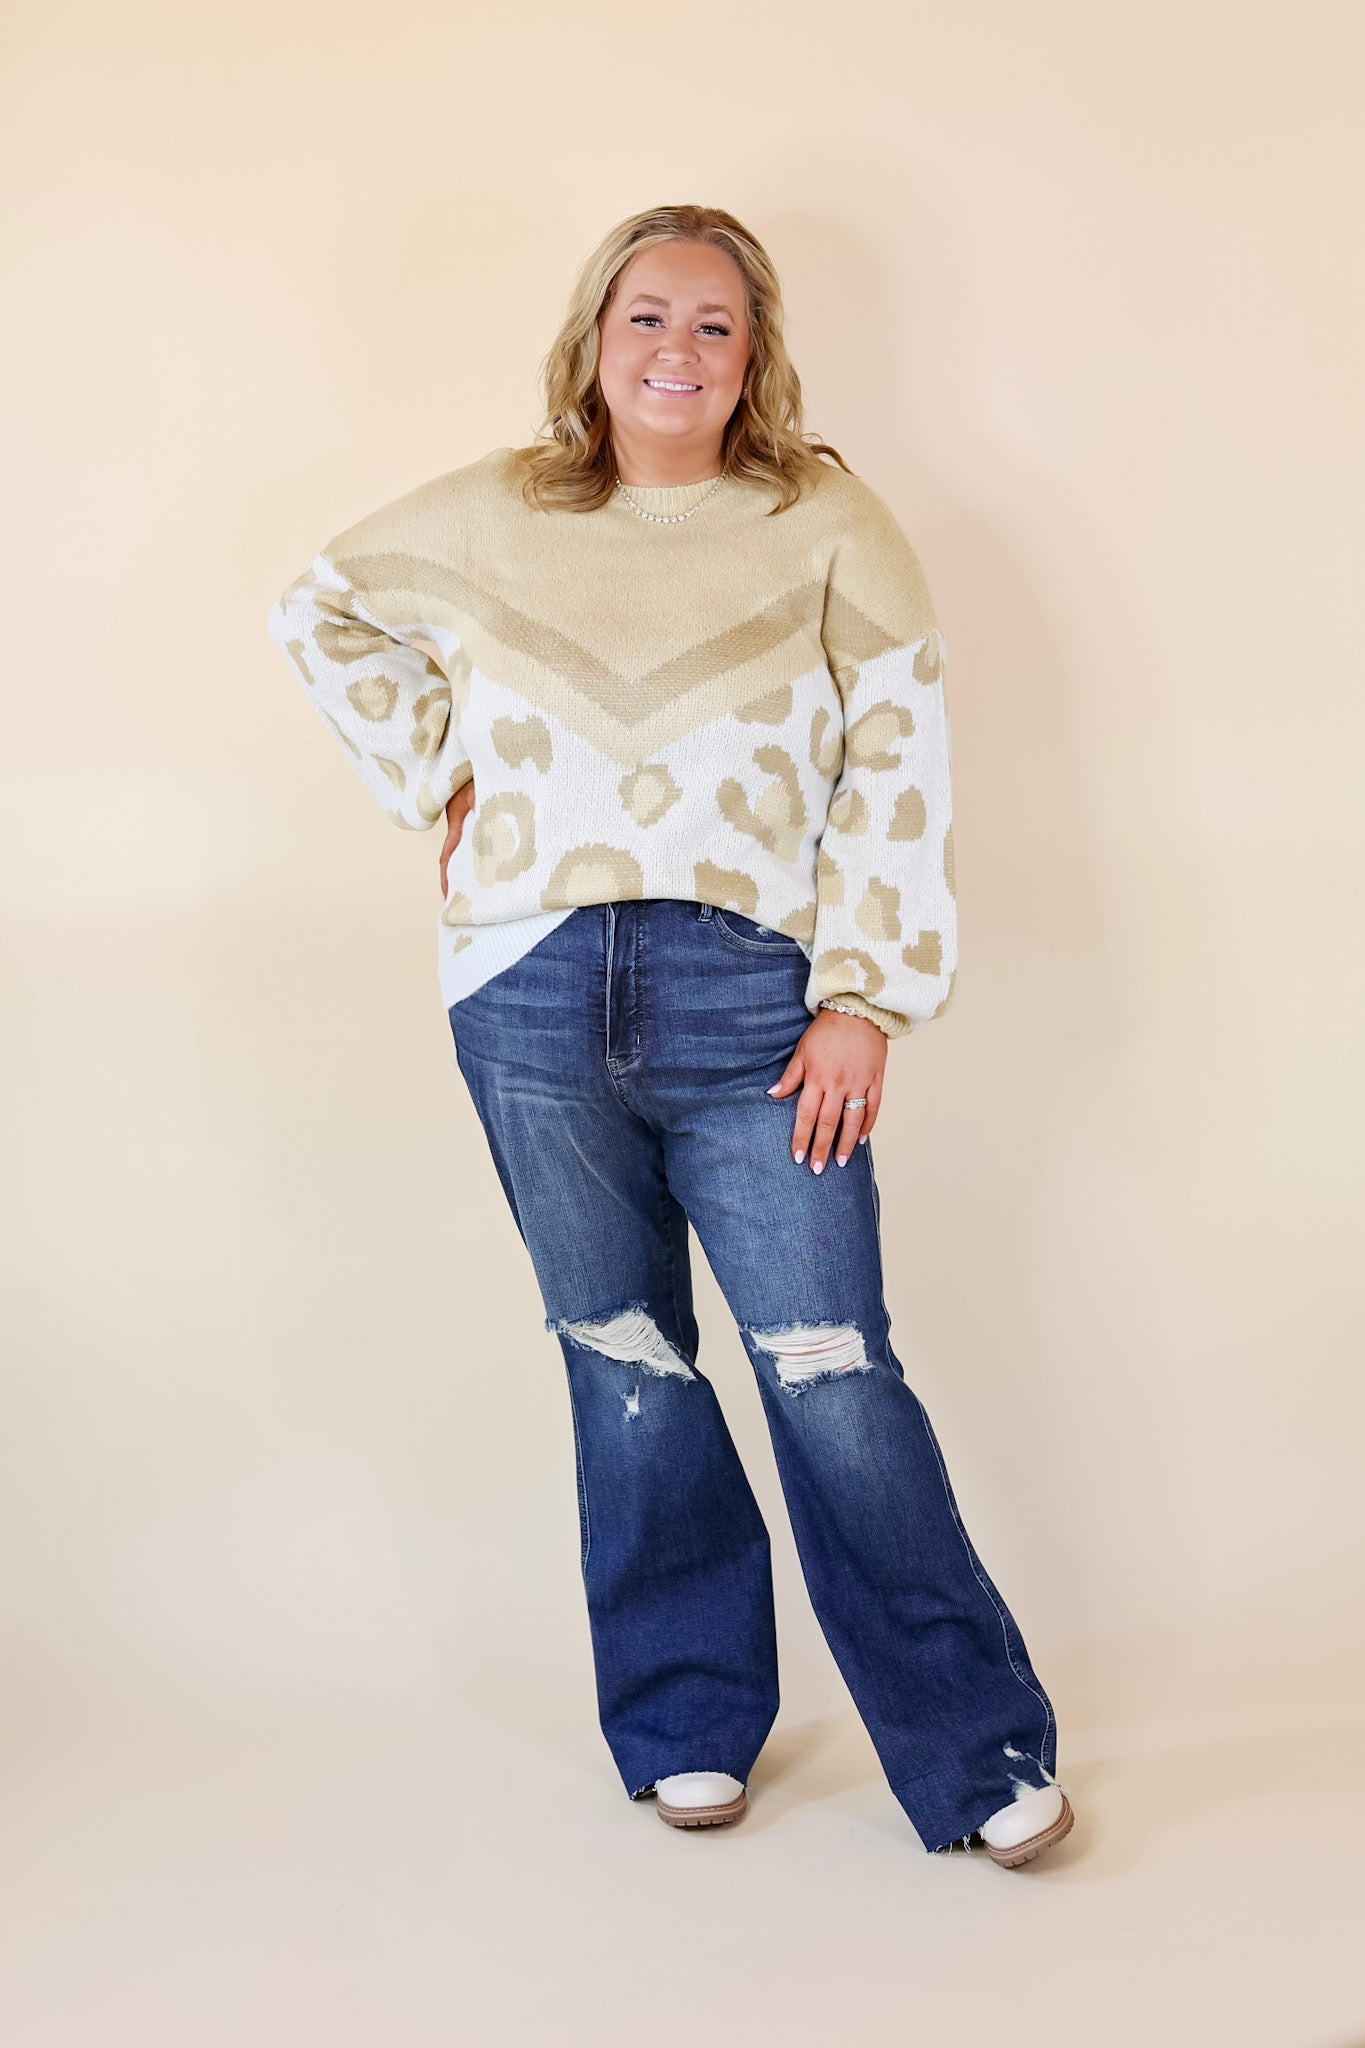 Thankful Thoughts Leopard Print and Chevron Print Block Sweater in Beige - Giddy Up Glamour Boutique